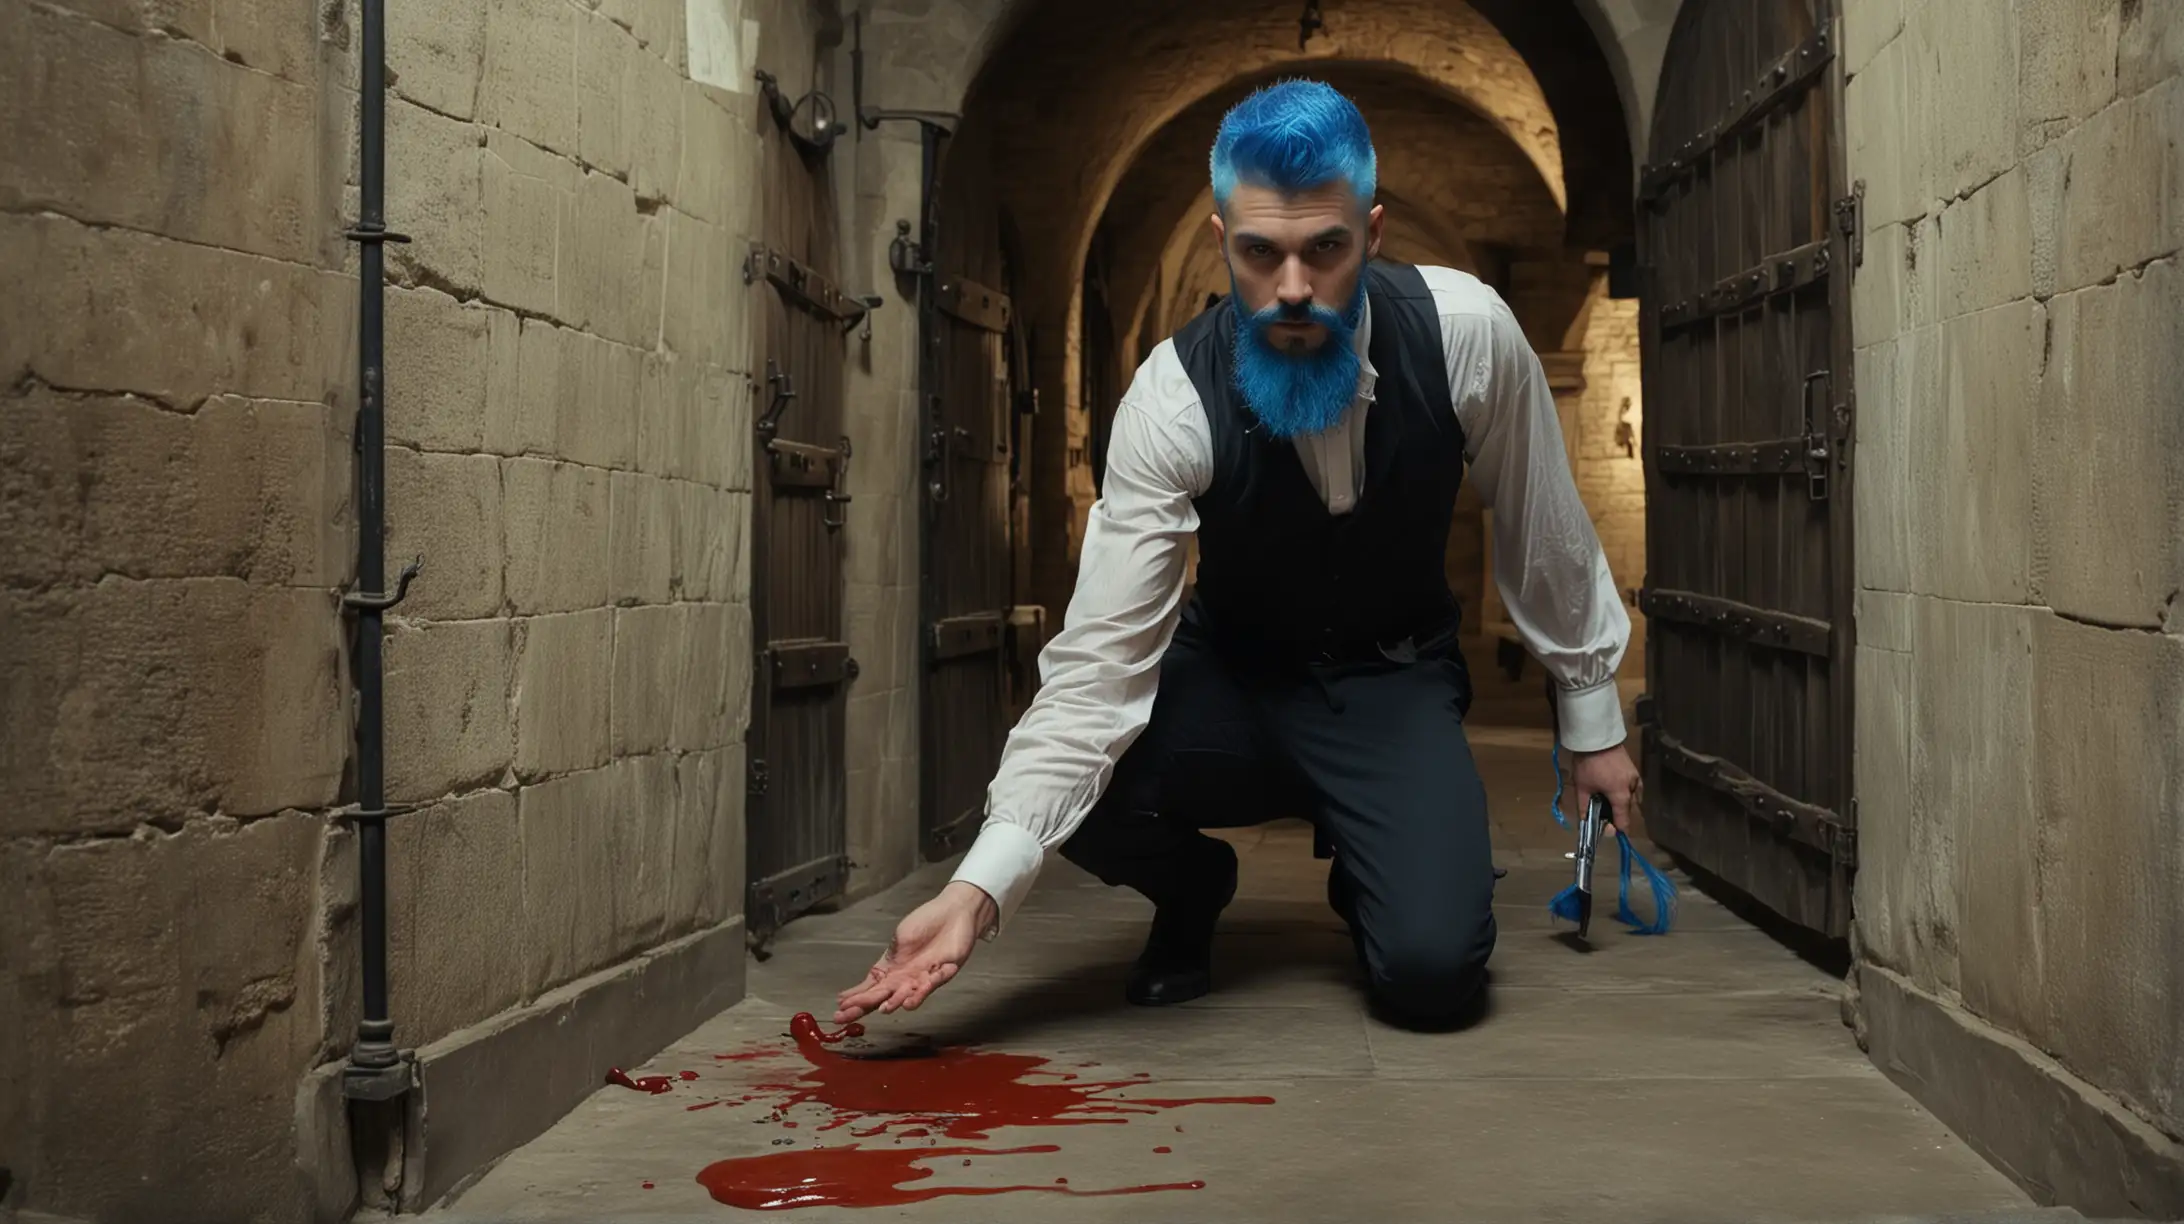 Aristocratic Young Man with Blue Beard Entering Dungeon with Blood on Floor